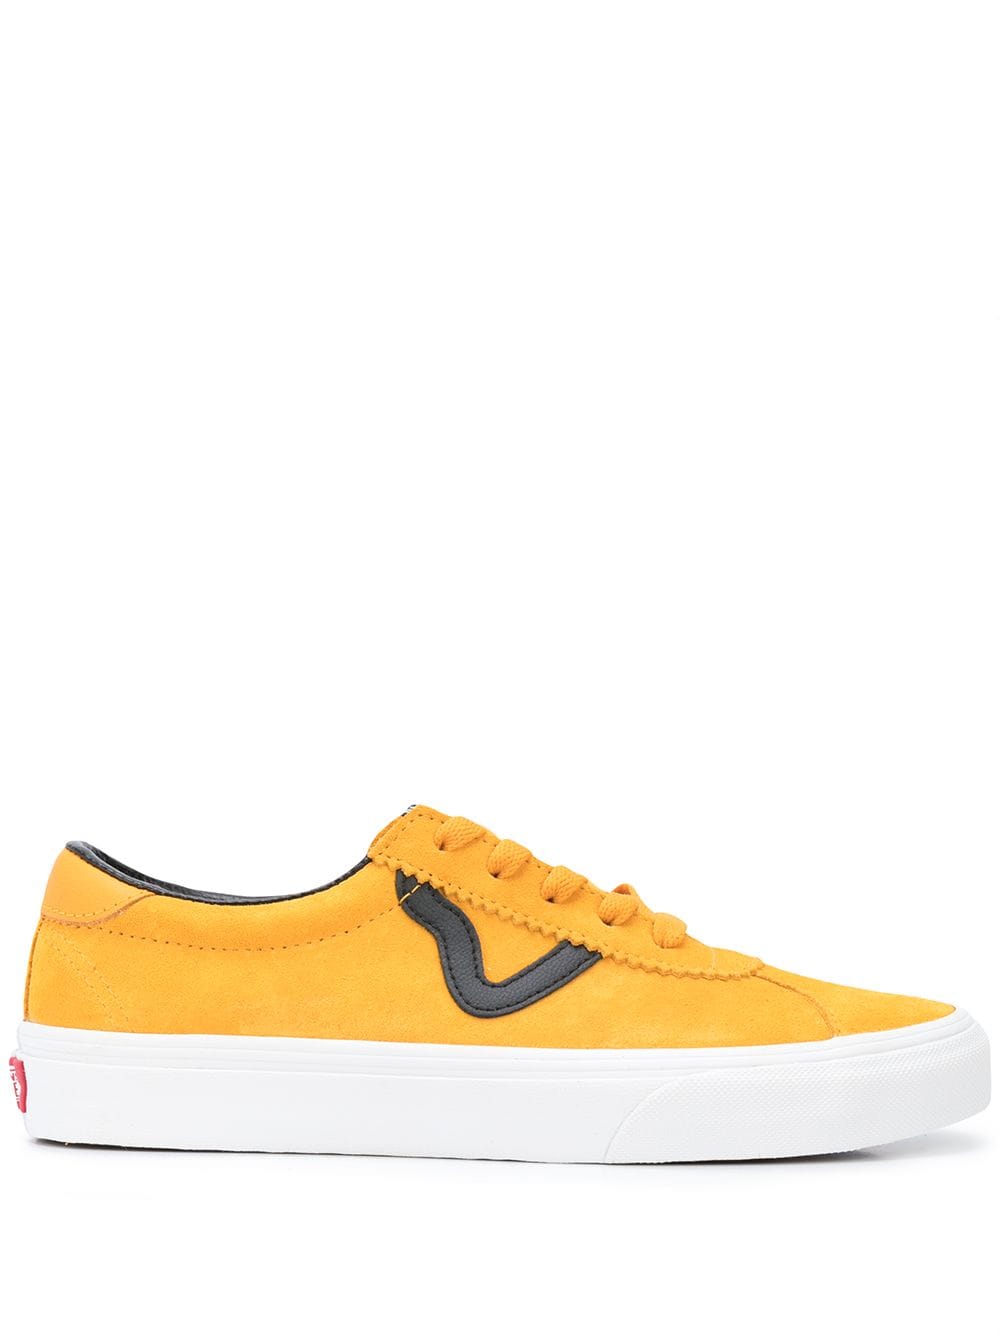 Vans Side Logo Trainers In Yellow